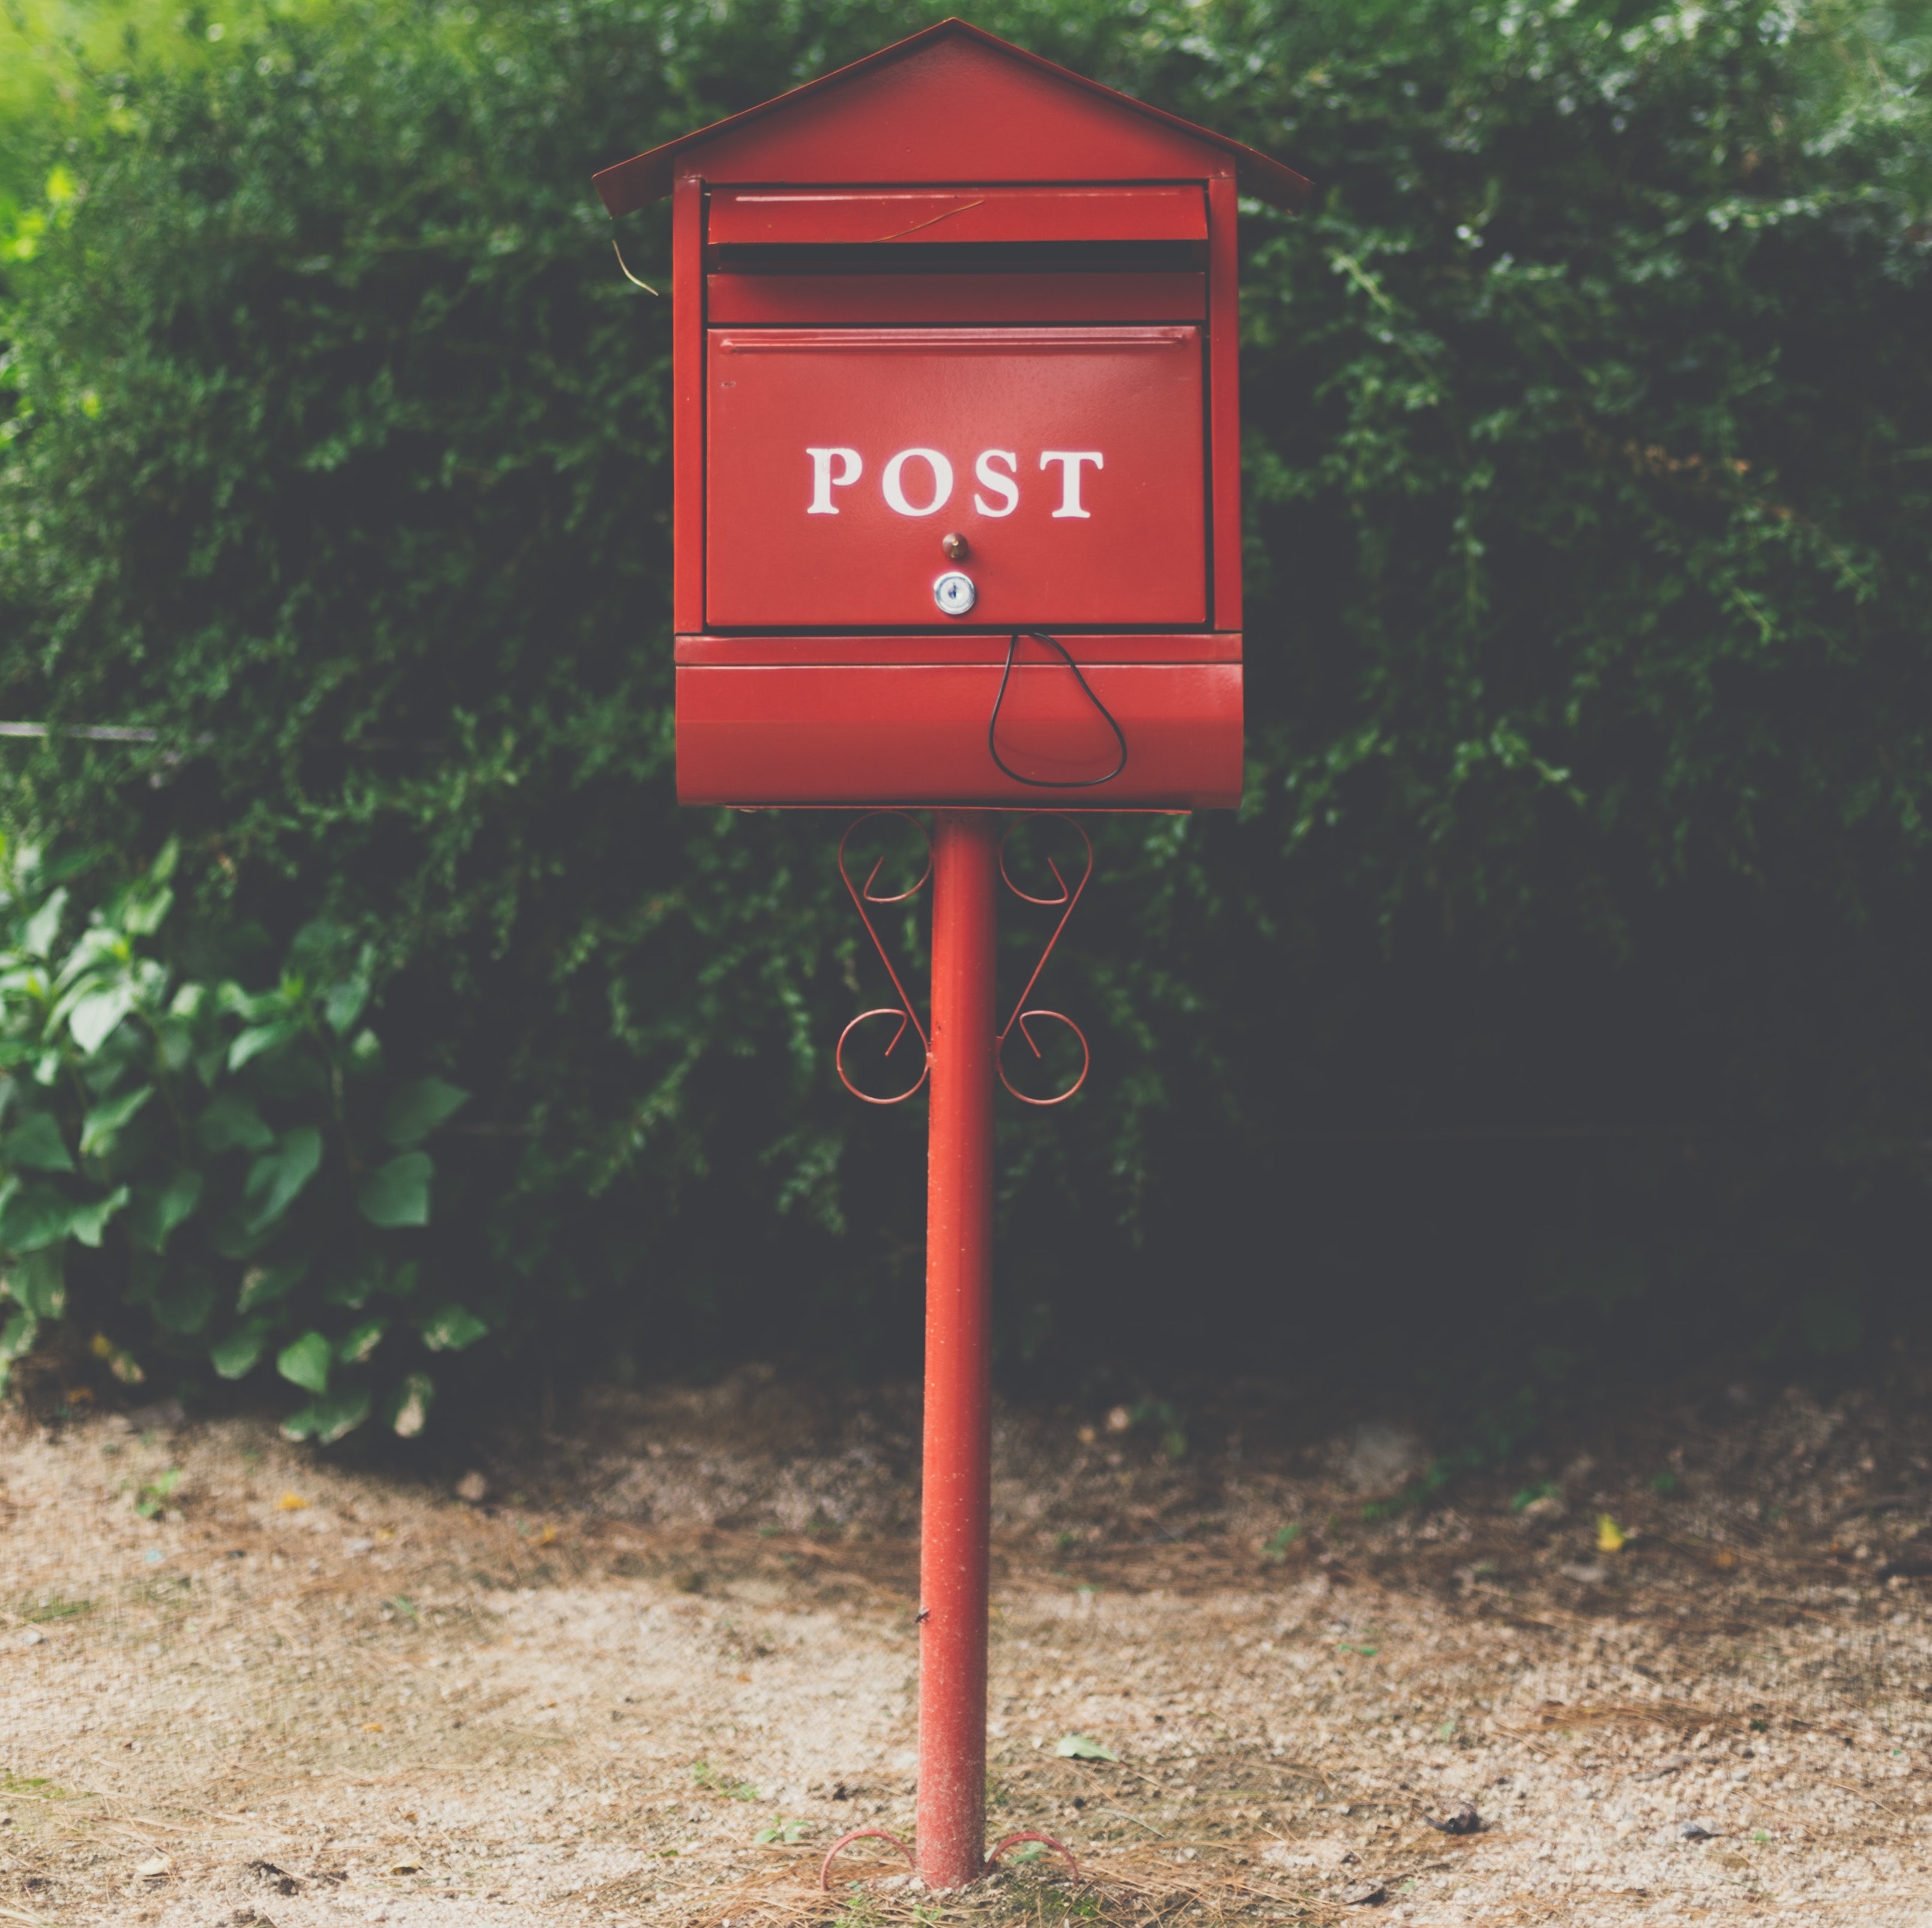 Mailbox with 'post' written on the front, greenery in the background